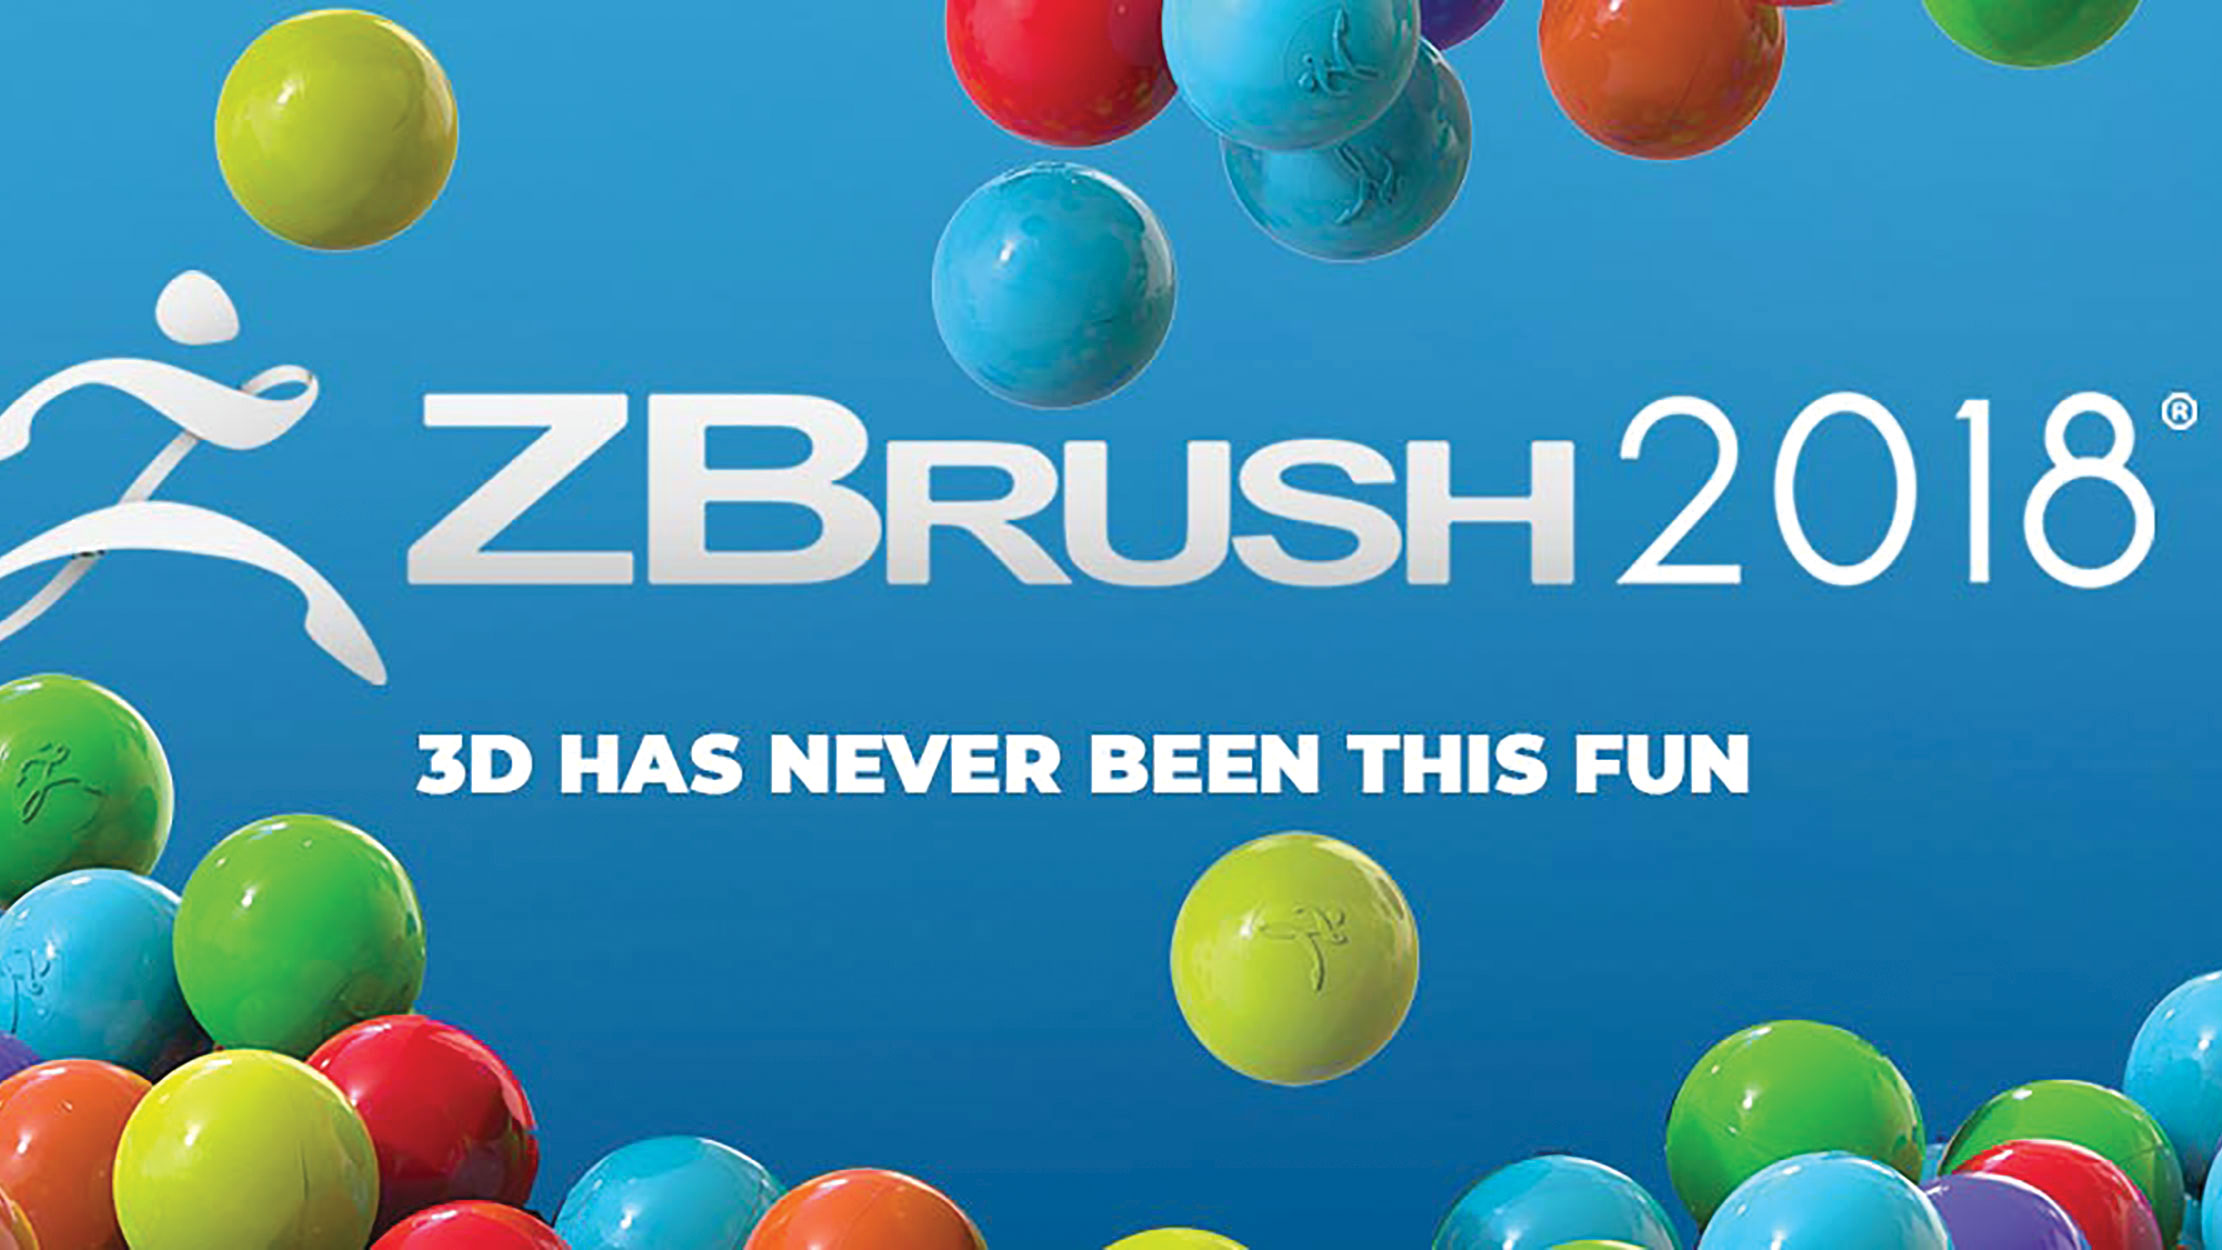 whats new in zbrush 2018